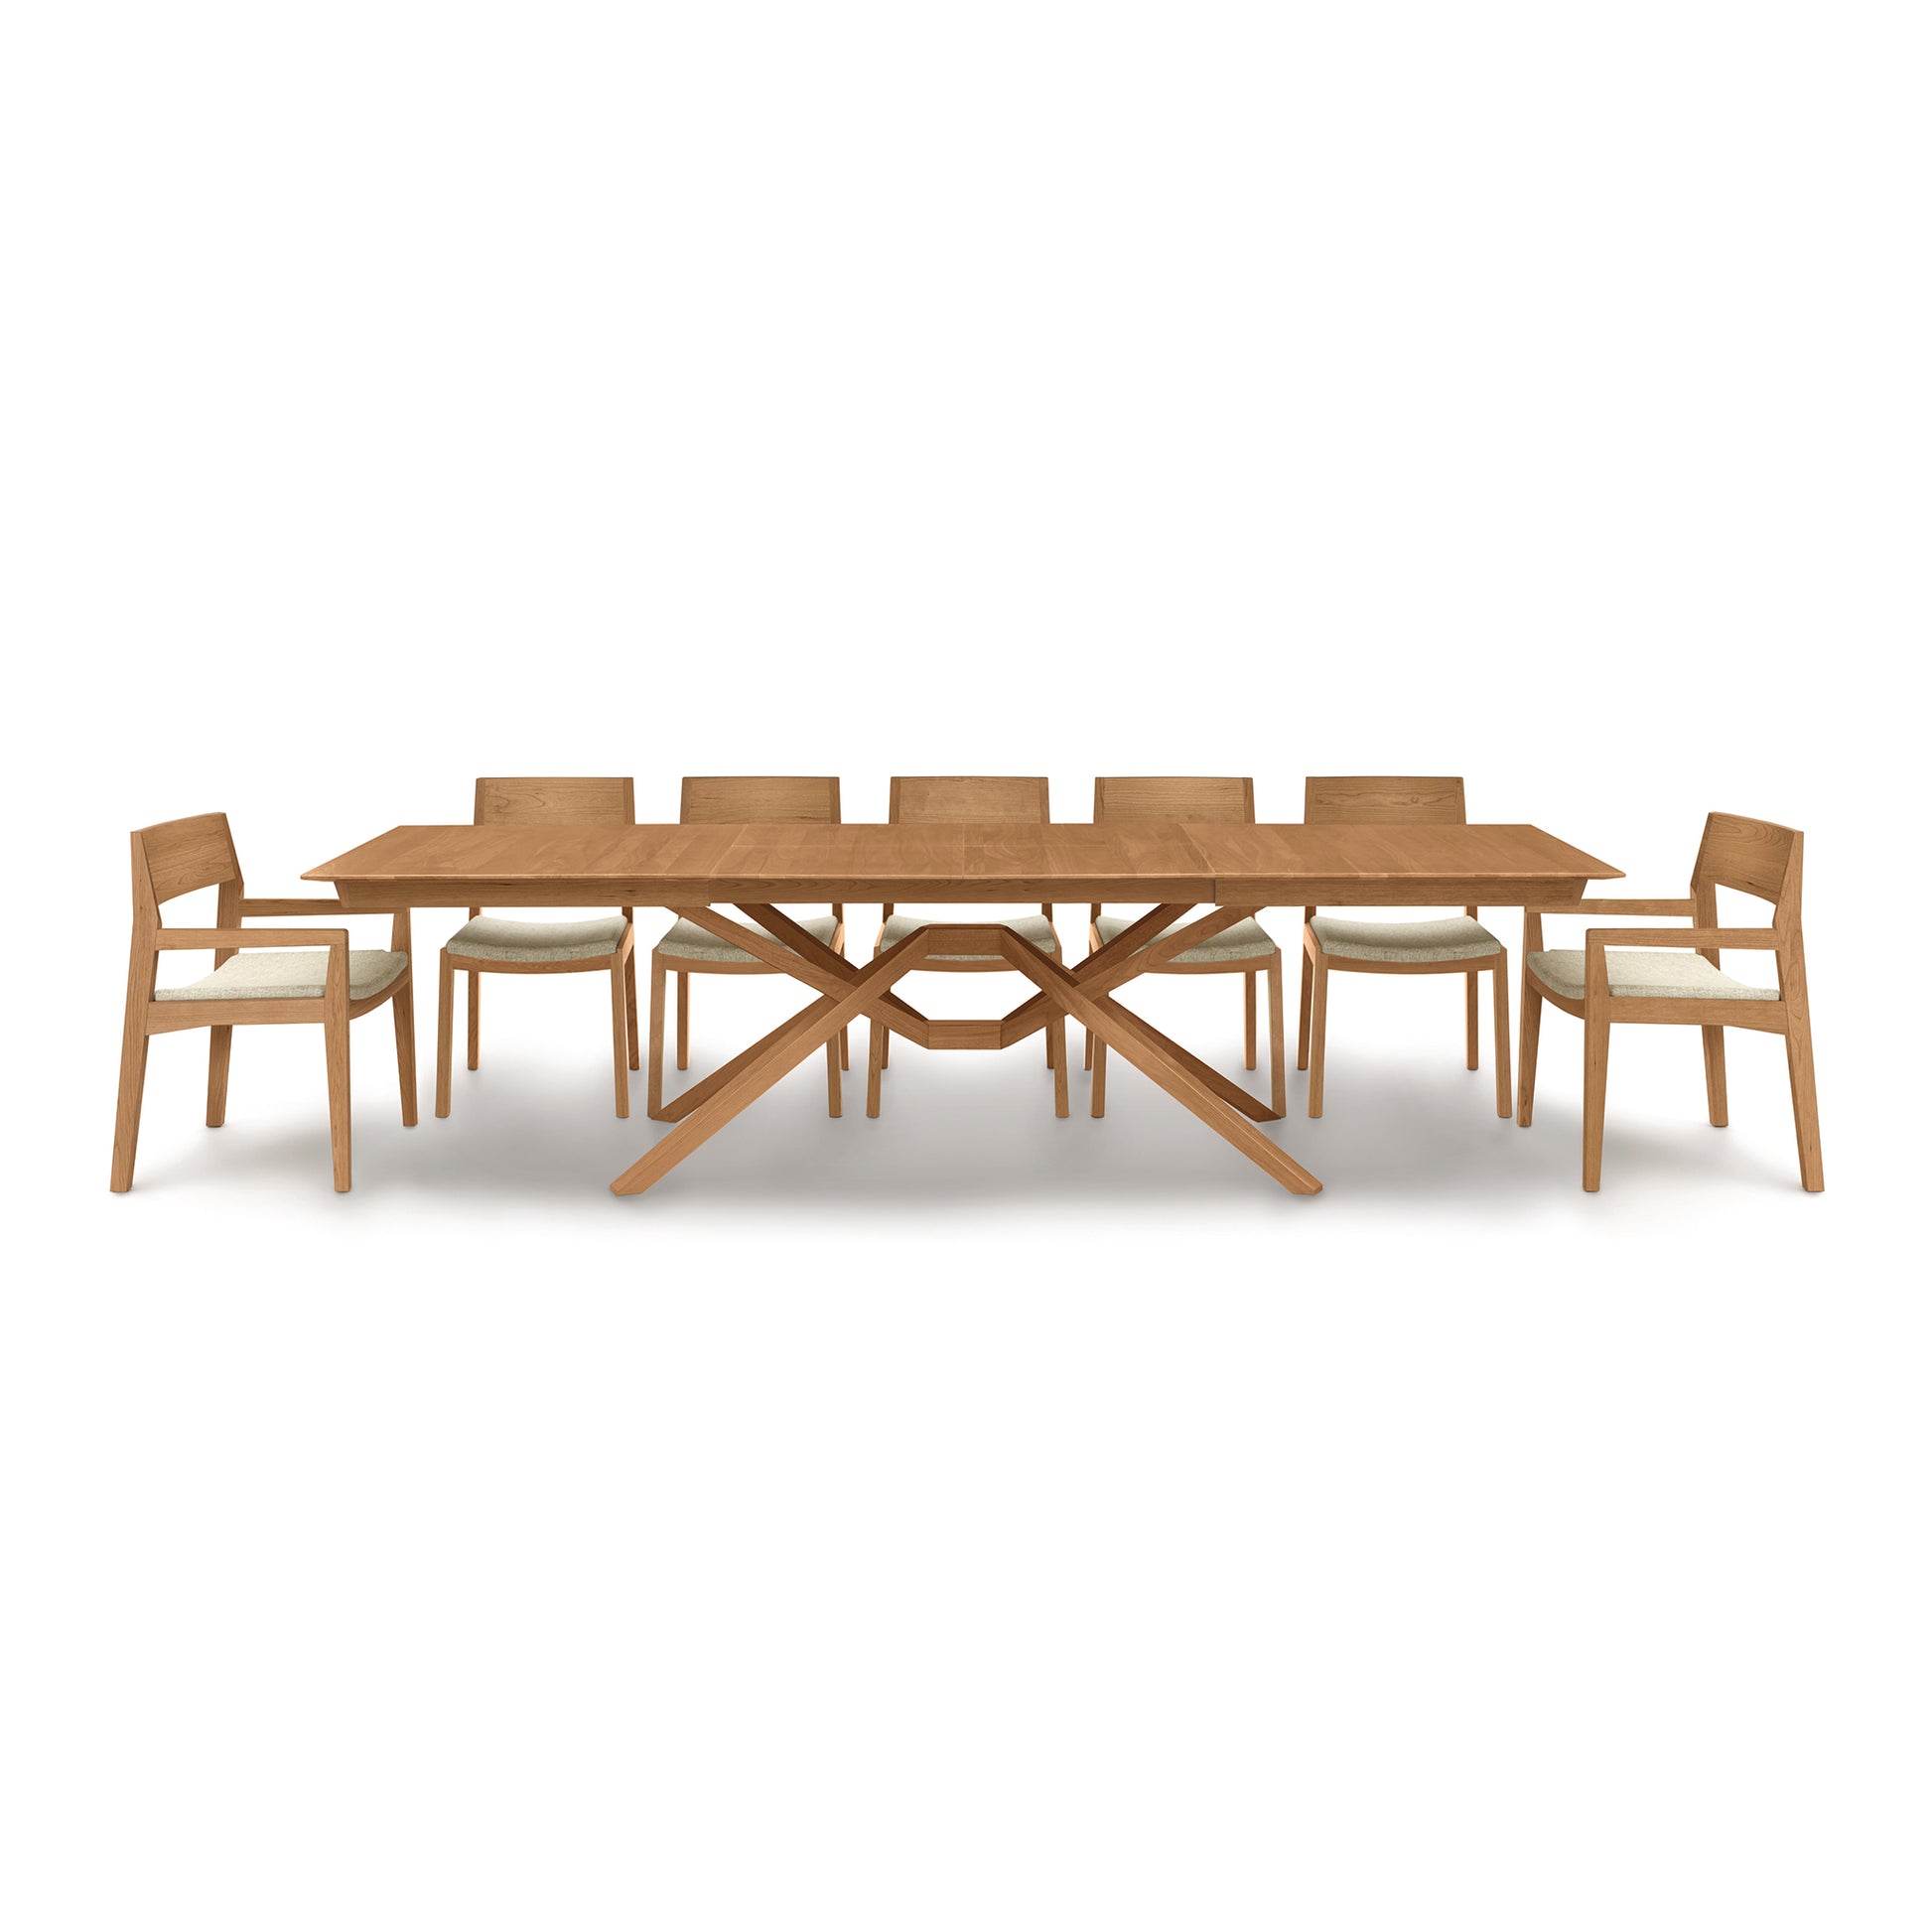 A Copeland Furniture Exeter Extension Dining Table with six chairs and extension capability.